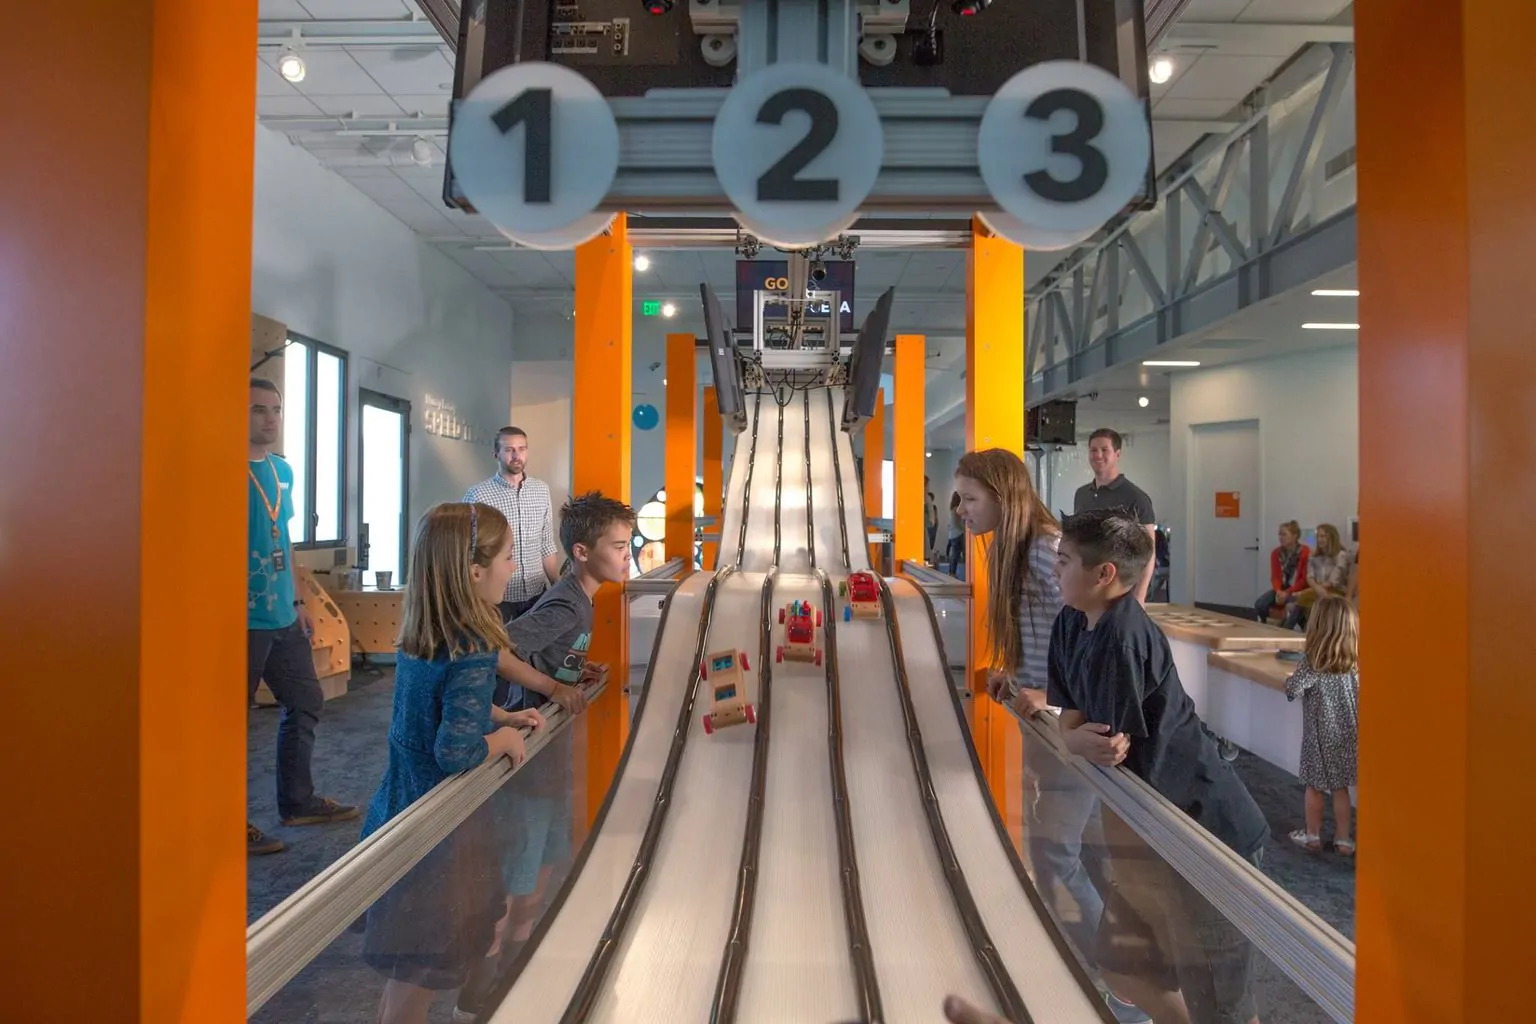 Do your kids love science? Take them to visit The MOXI in Santa Barbara, a contemporary museum devoted to science, technology and the arts.